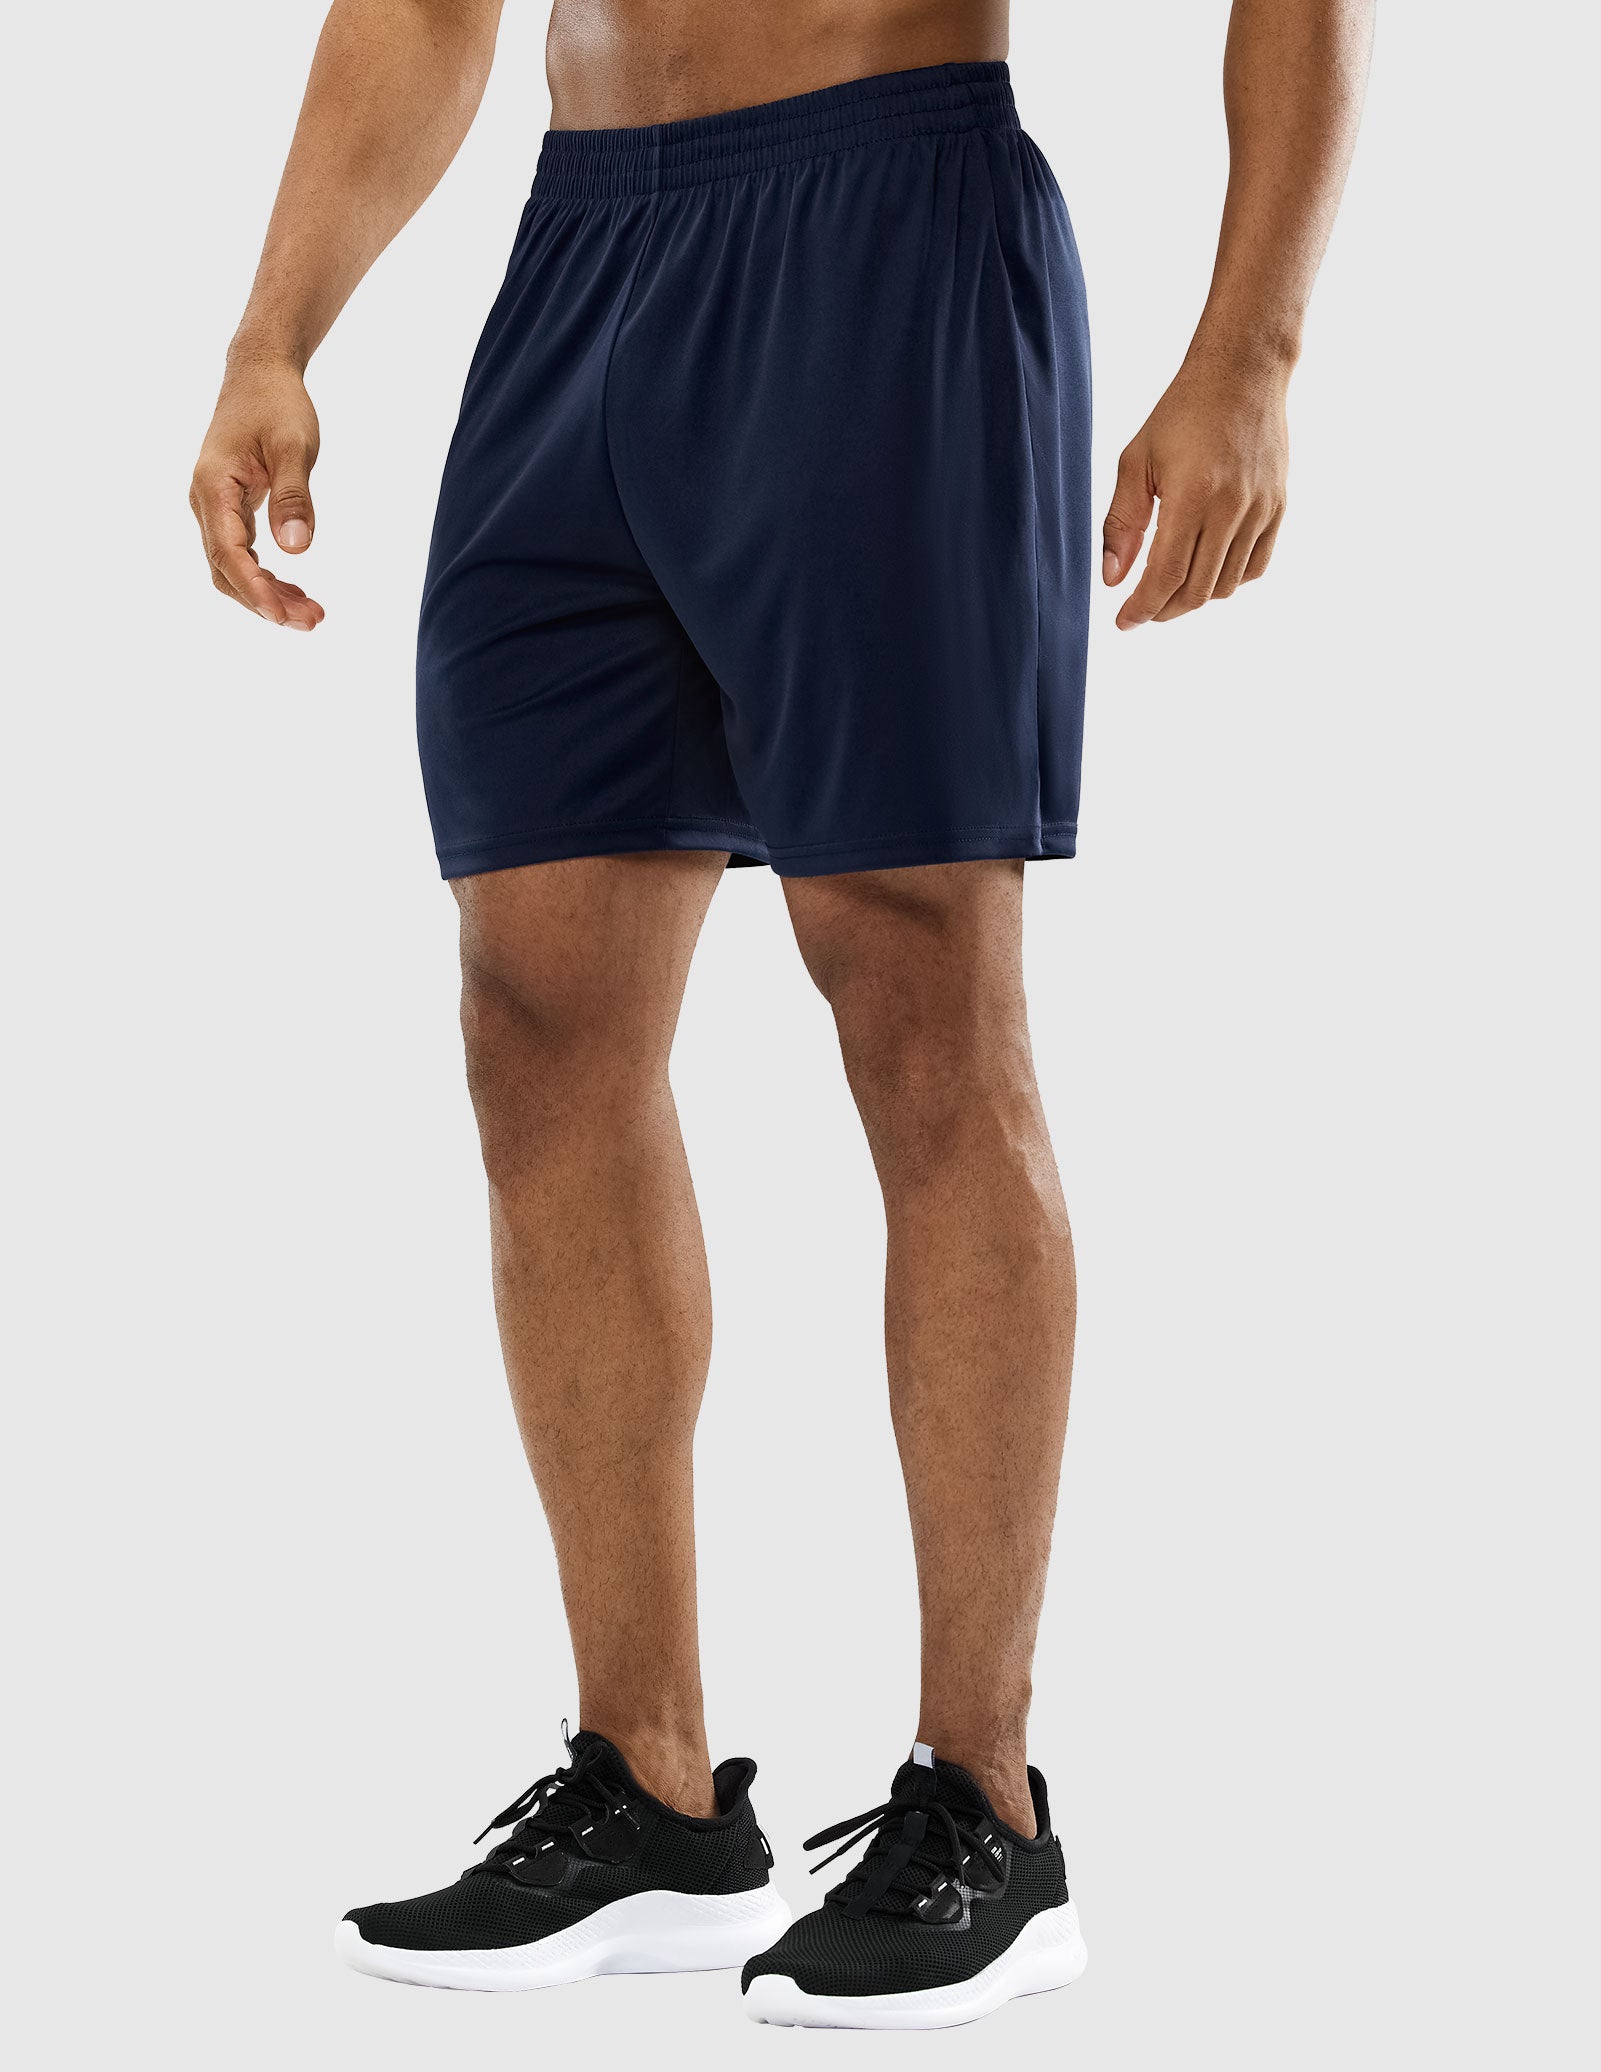 Men's Quick-Dry Athletic Running Shorts without Pockets